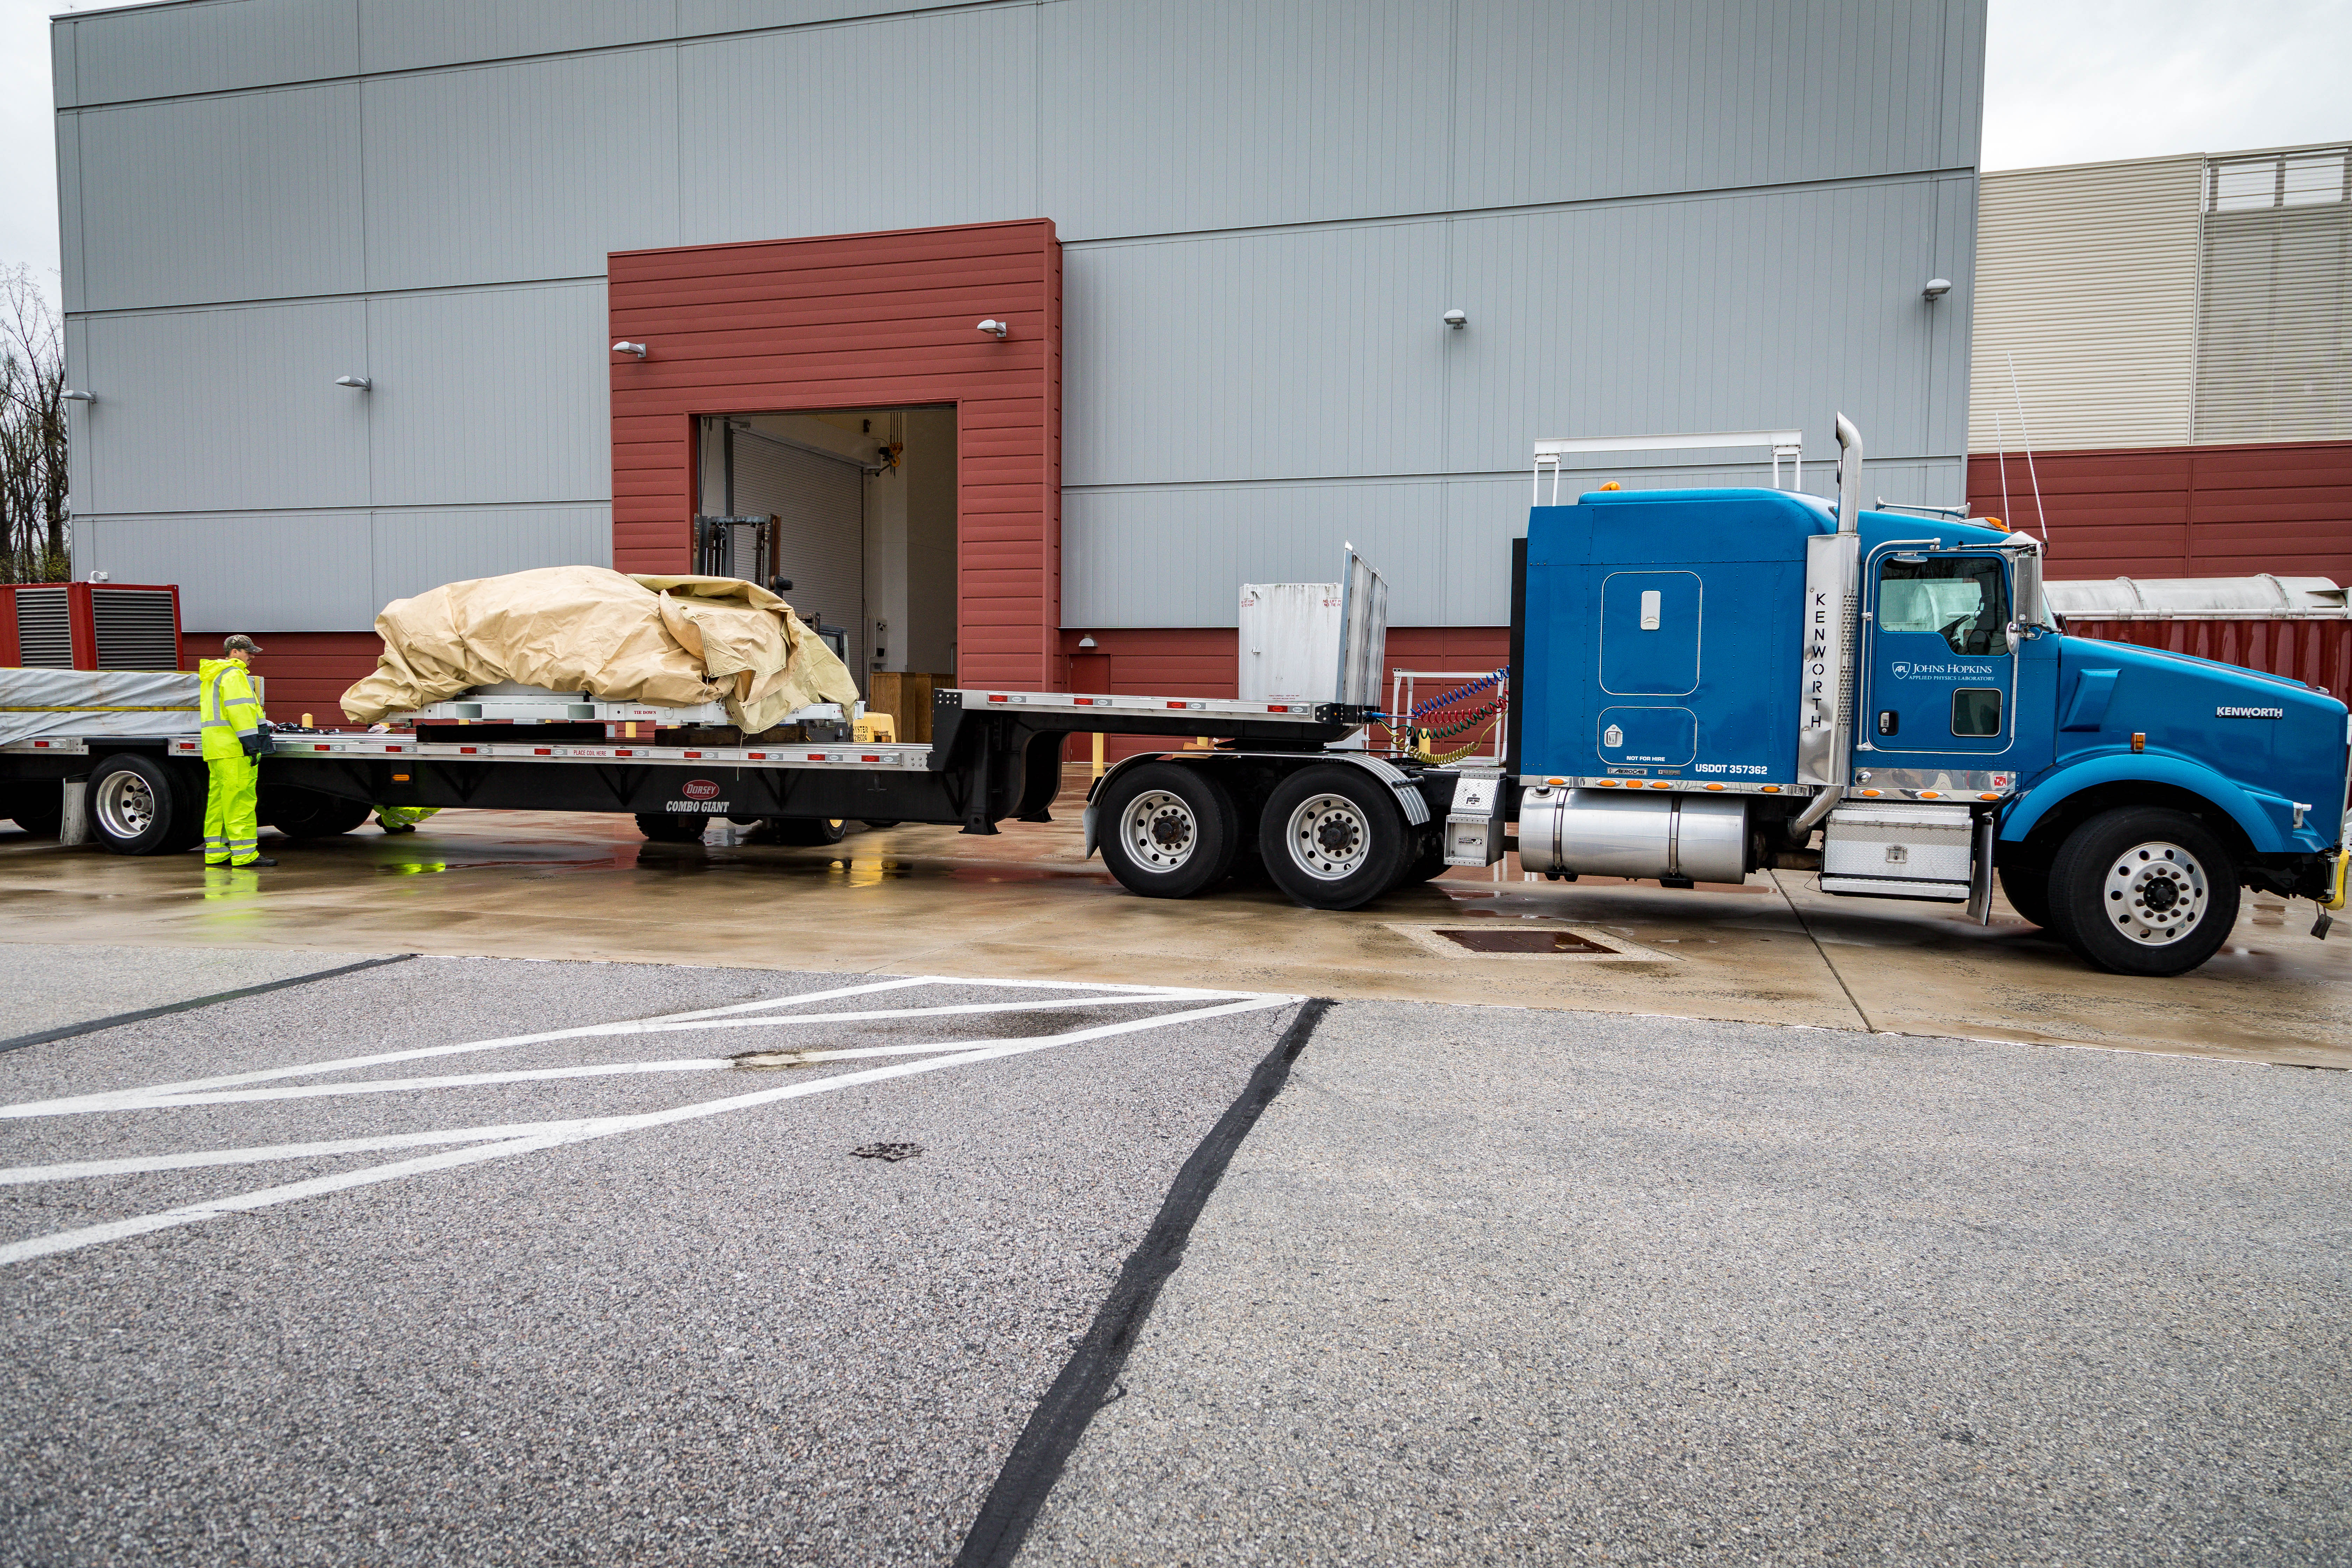 Parker Solar Probe’s heat shield – called the Thermal Protection System – departs from the Johns Hopkins Applied Physics Laboratory in Laurel, Maryland, on April 16, 2018. The heat shield traveled to Astrotech Space Operations in Titusville, Florida, on the flatbed of a truck, safely protected from the elements in its metal shipping container.